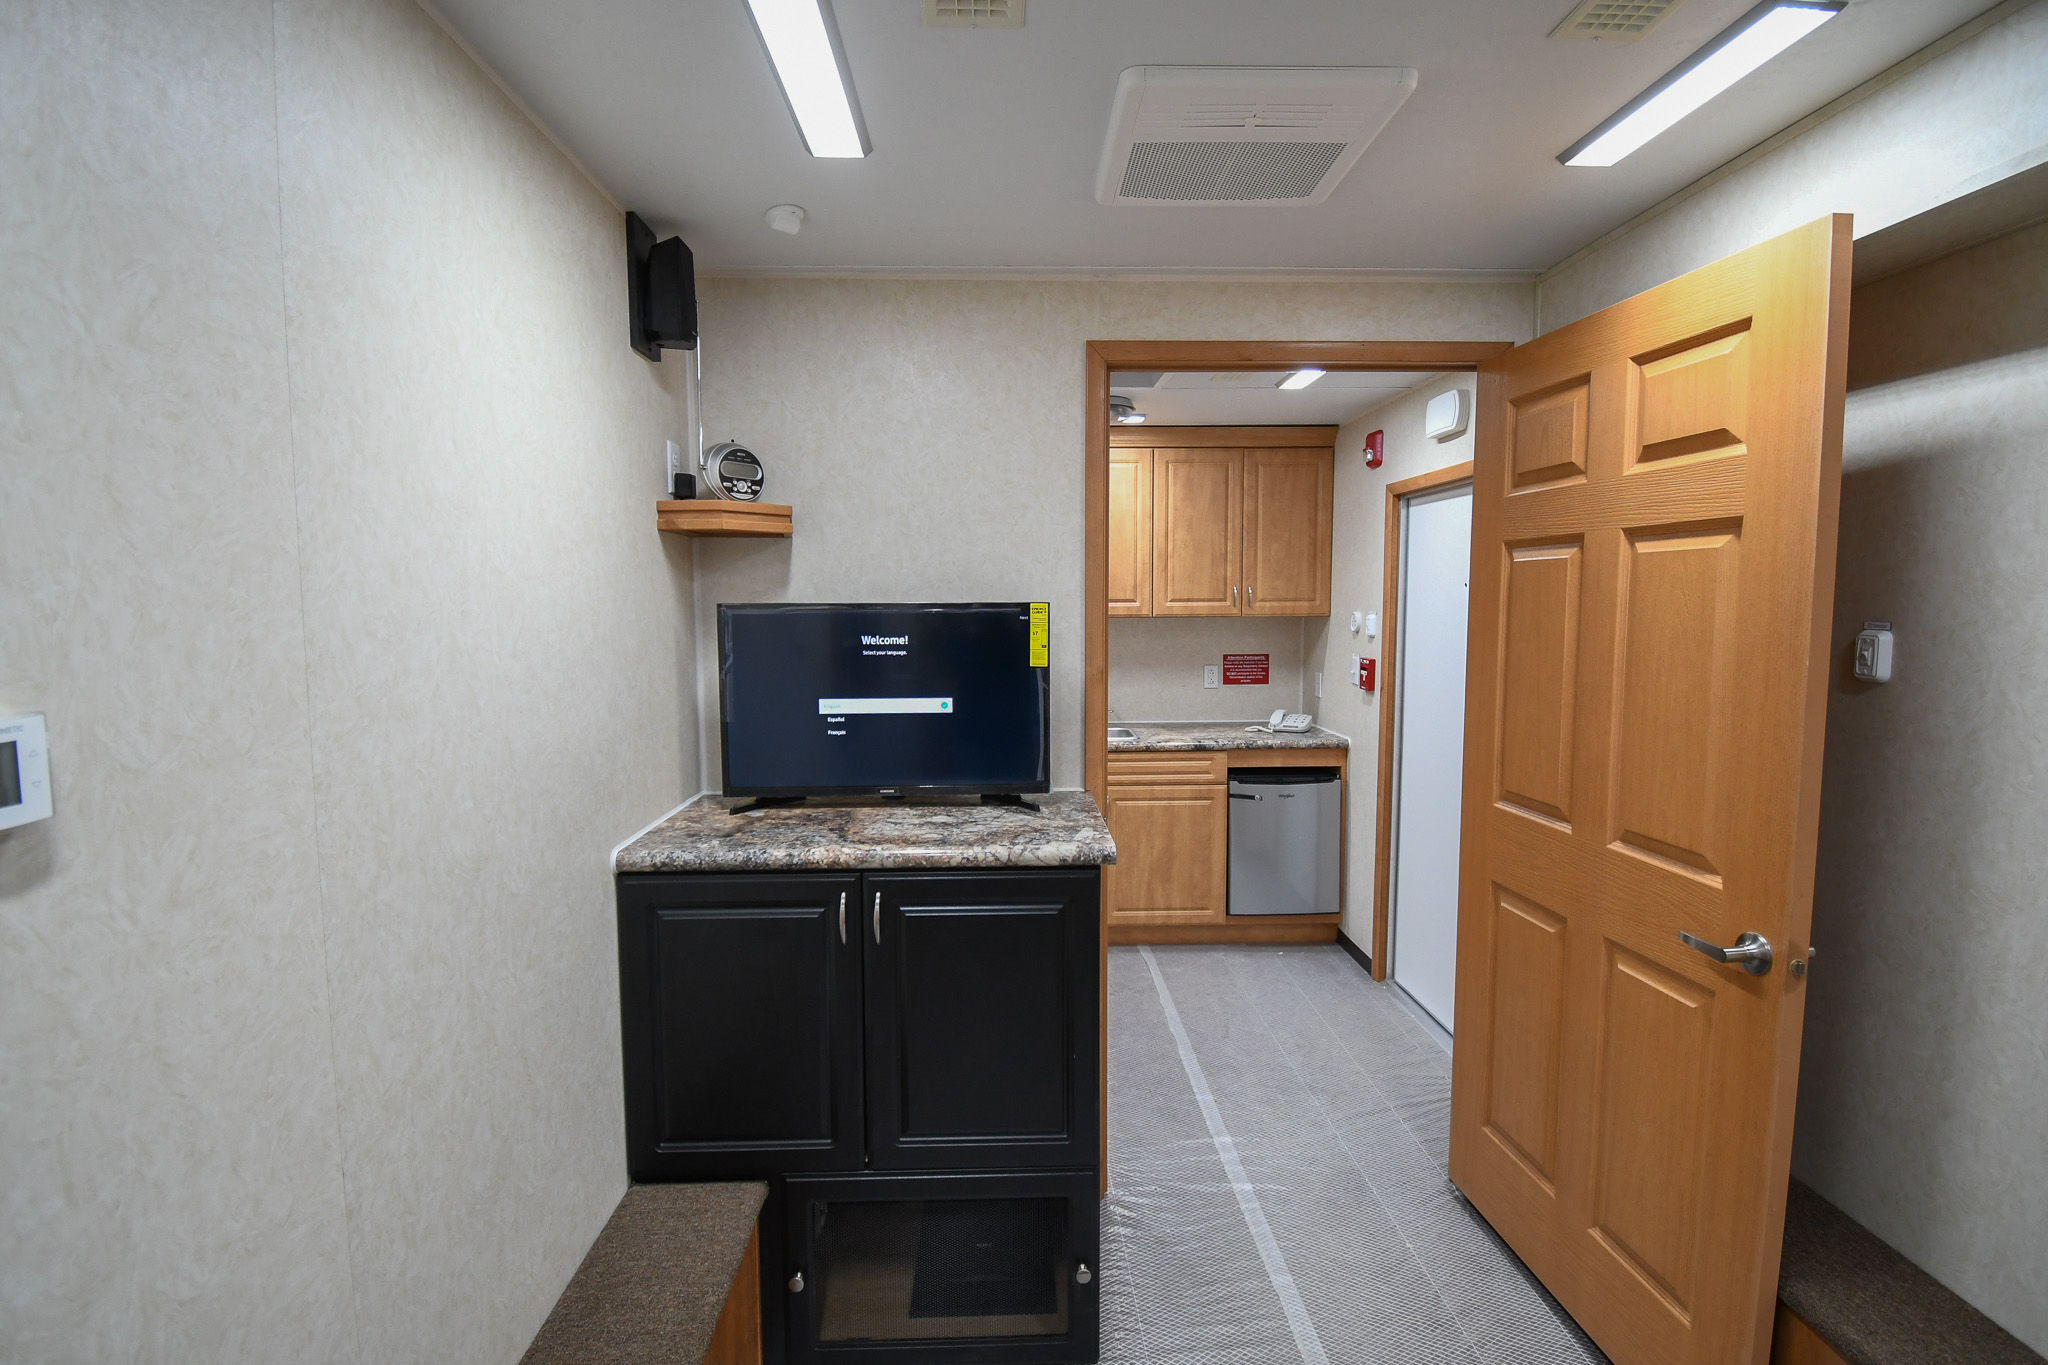 A secondary view of the living room stage inside the unit for Gaithersburg, MD.